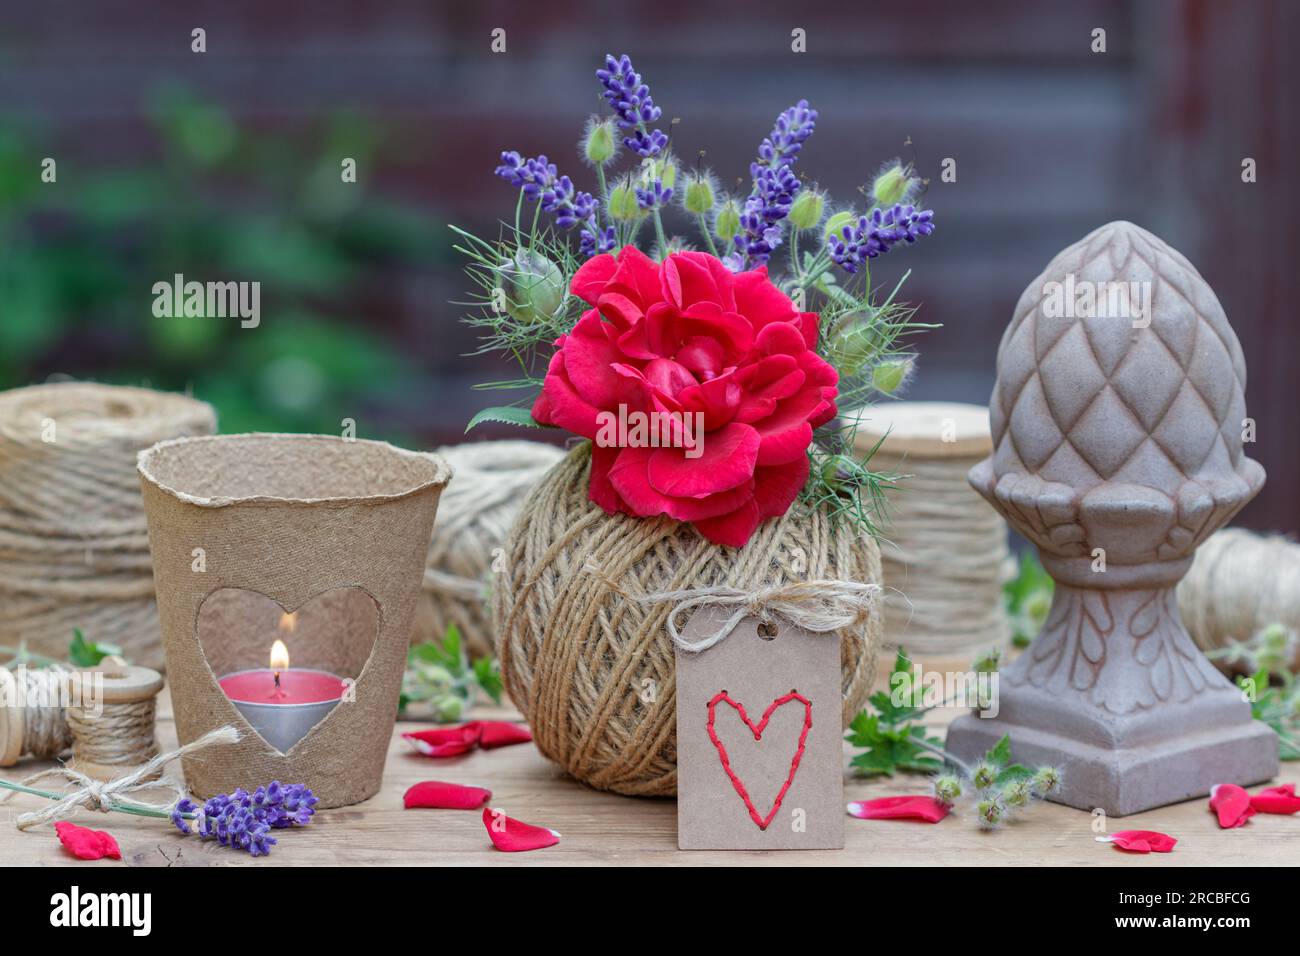 romantic decoration with bouquet of red rose and lavender flowers, table lantern and balls of yarn Stock Photo